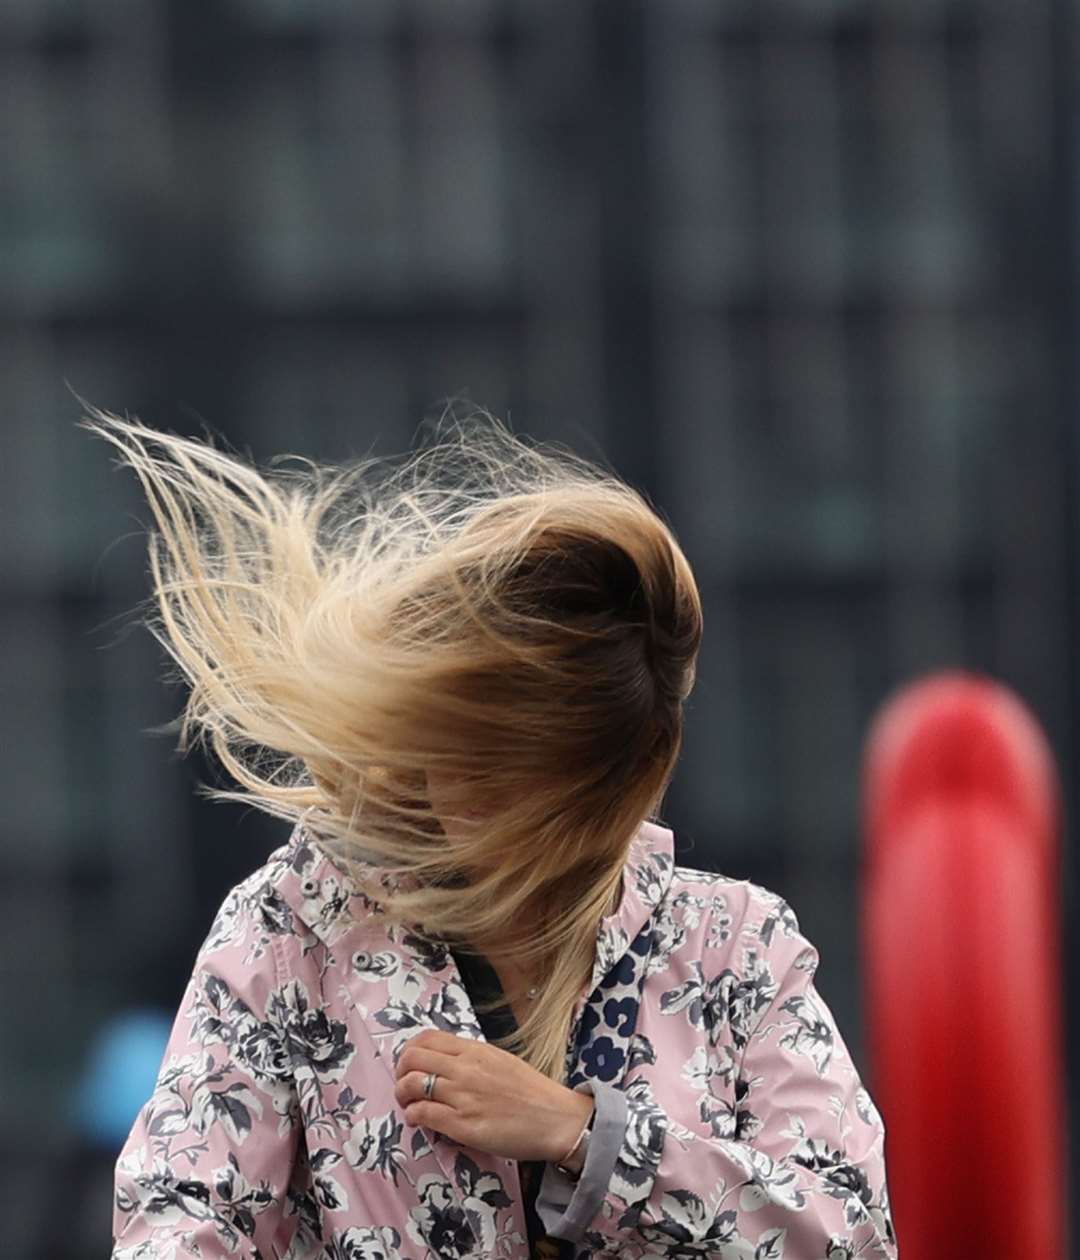 The wind catches a woman’s hair in London as Storm Francis hit the UK on August 25 (Yui Mok/PA)